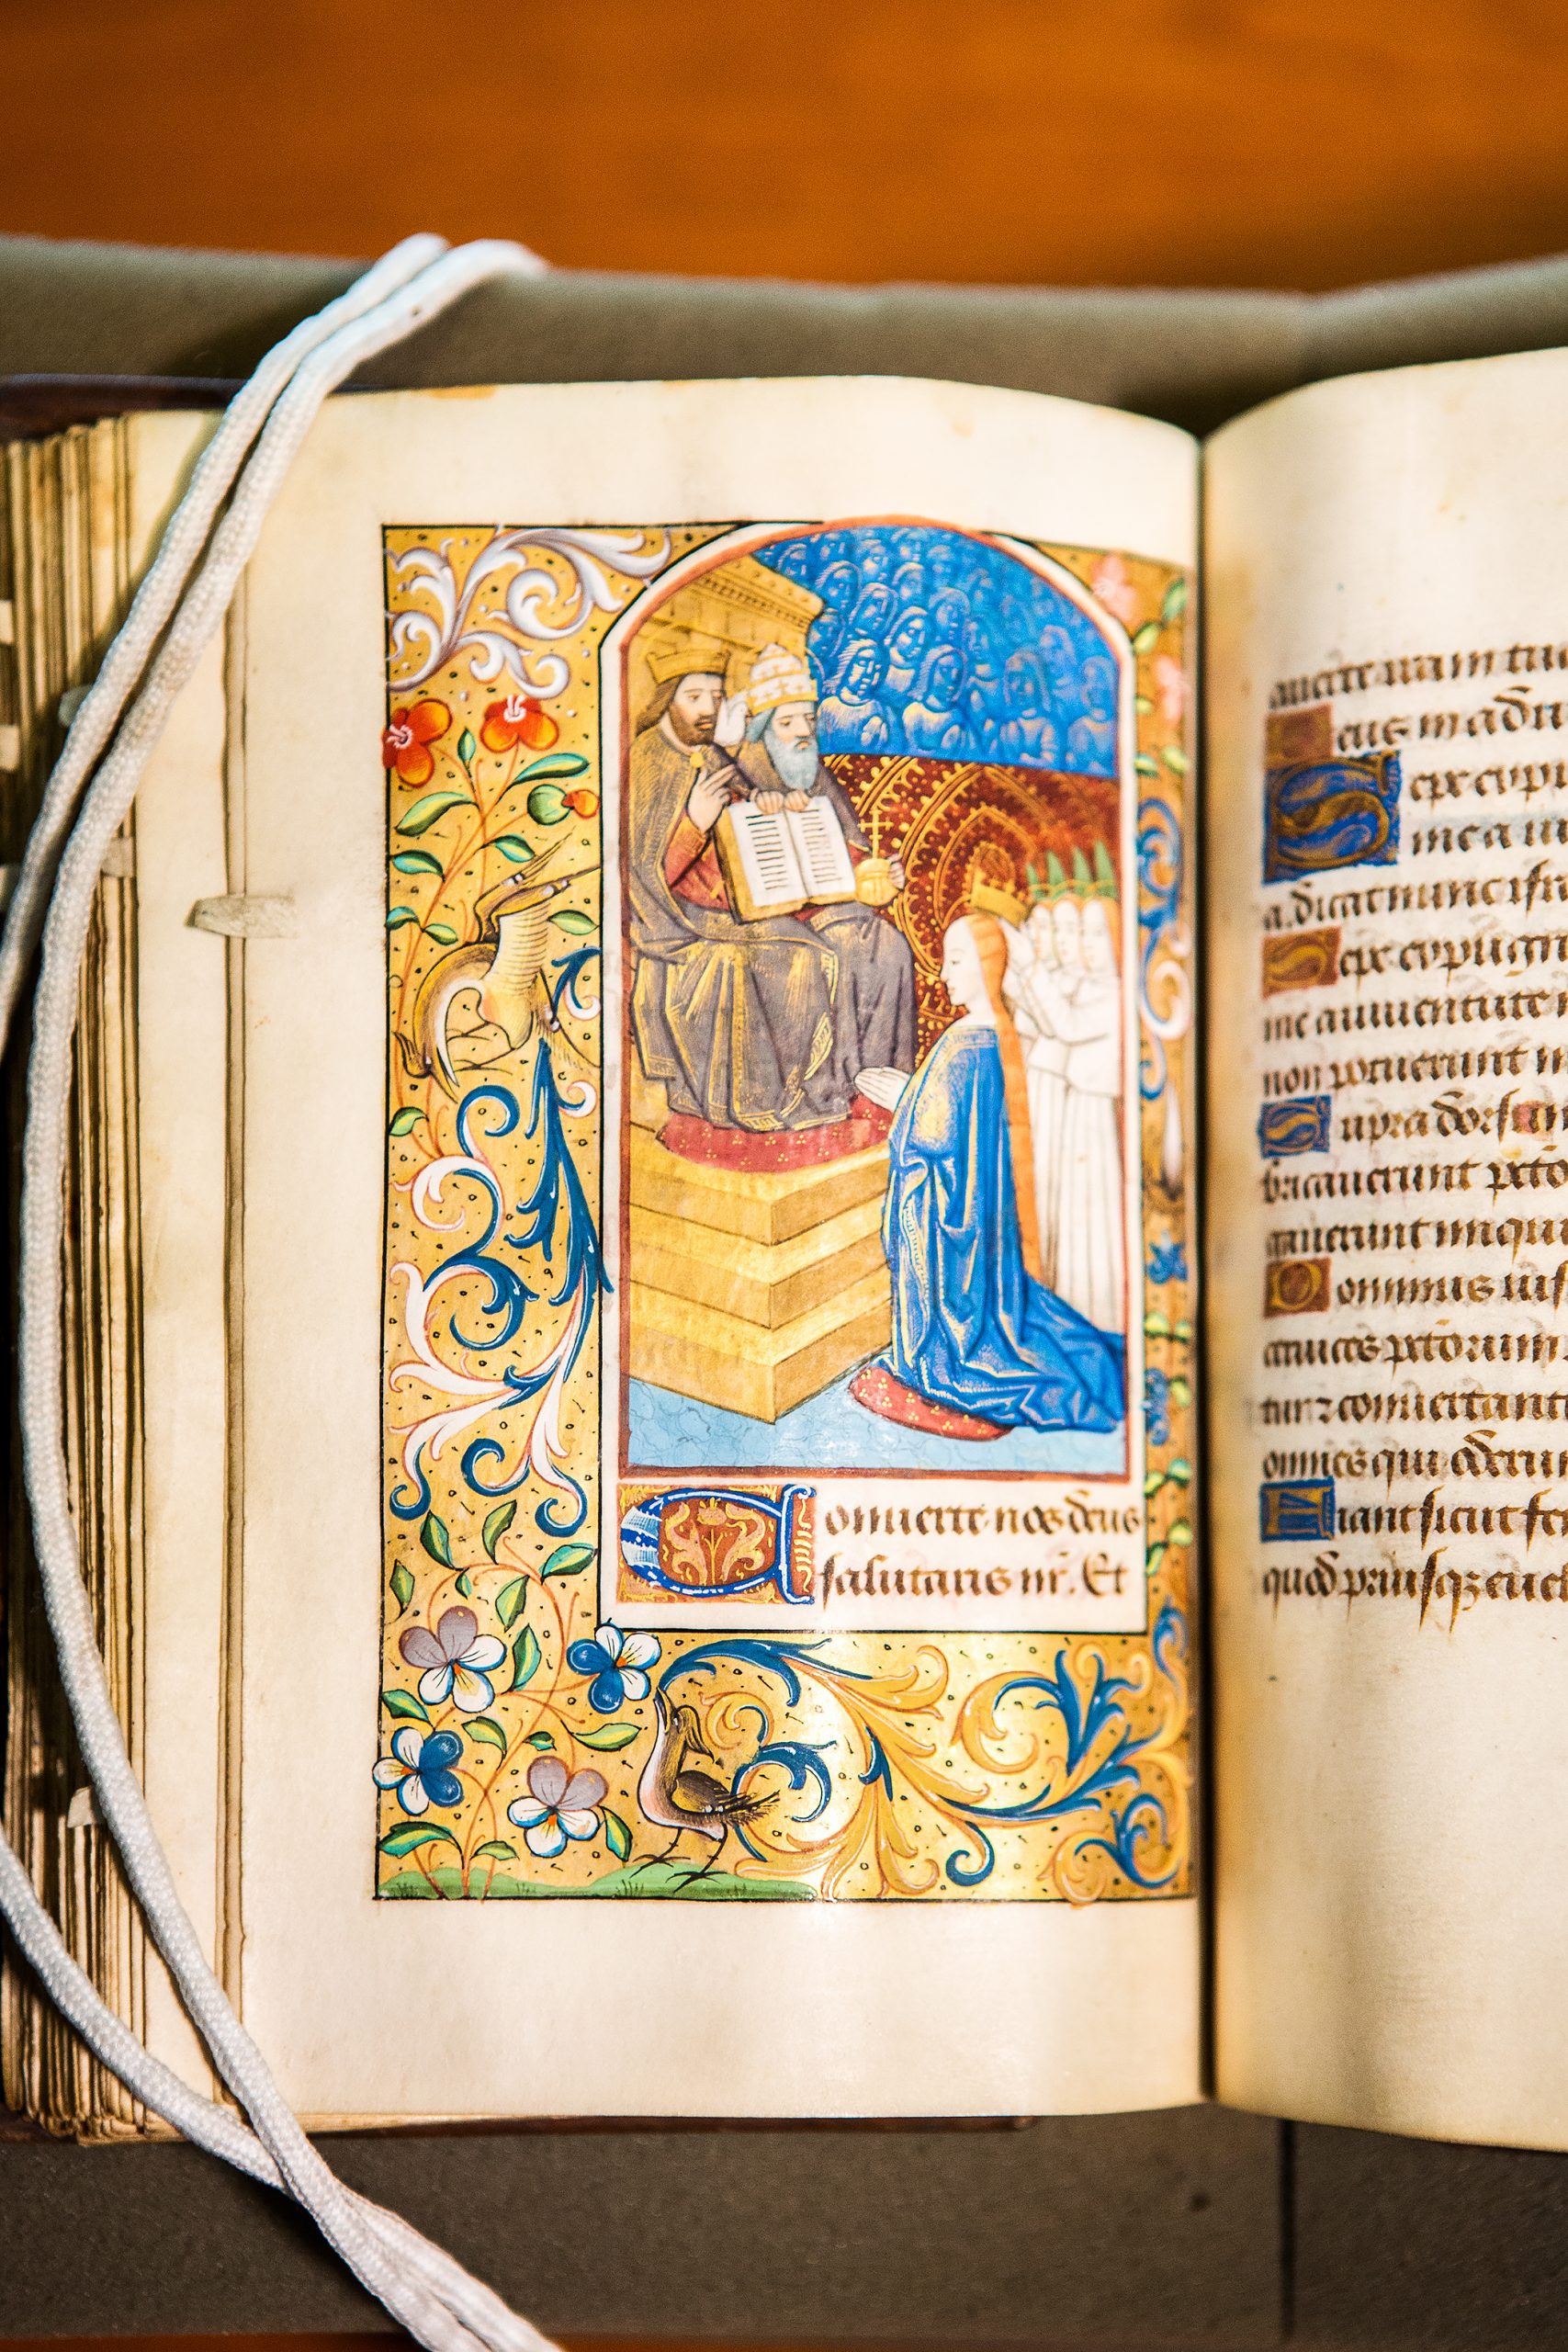 At bedtime, the French owner of this lavish prayer book could admire the Virgin’s coronation in heaven and reflect on the spiritual rewards of motherhood. She kneels before the Trinity: Father, Son, and Holy Ghost, who is depicted as a dove. Bright blue cherubim look on in the background.